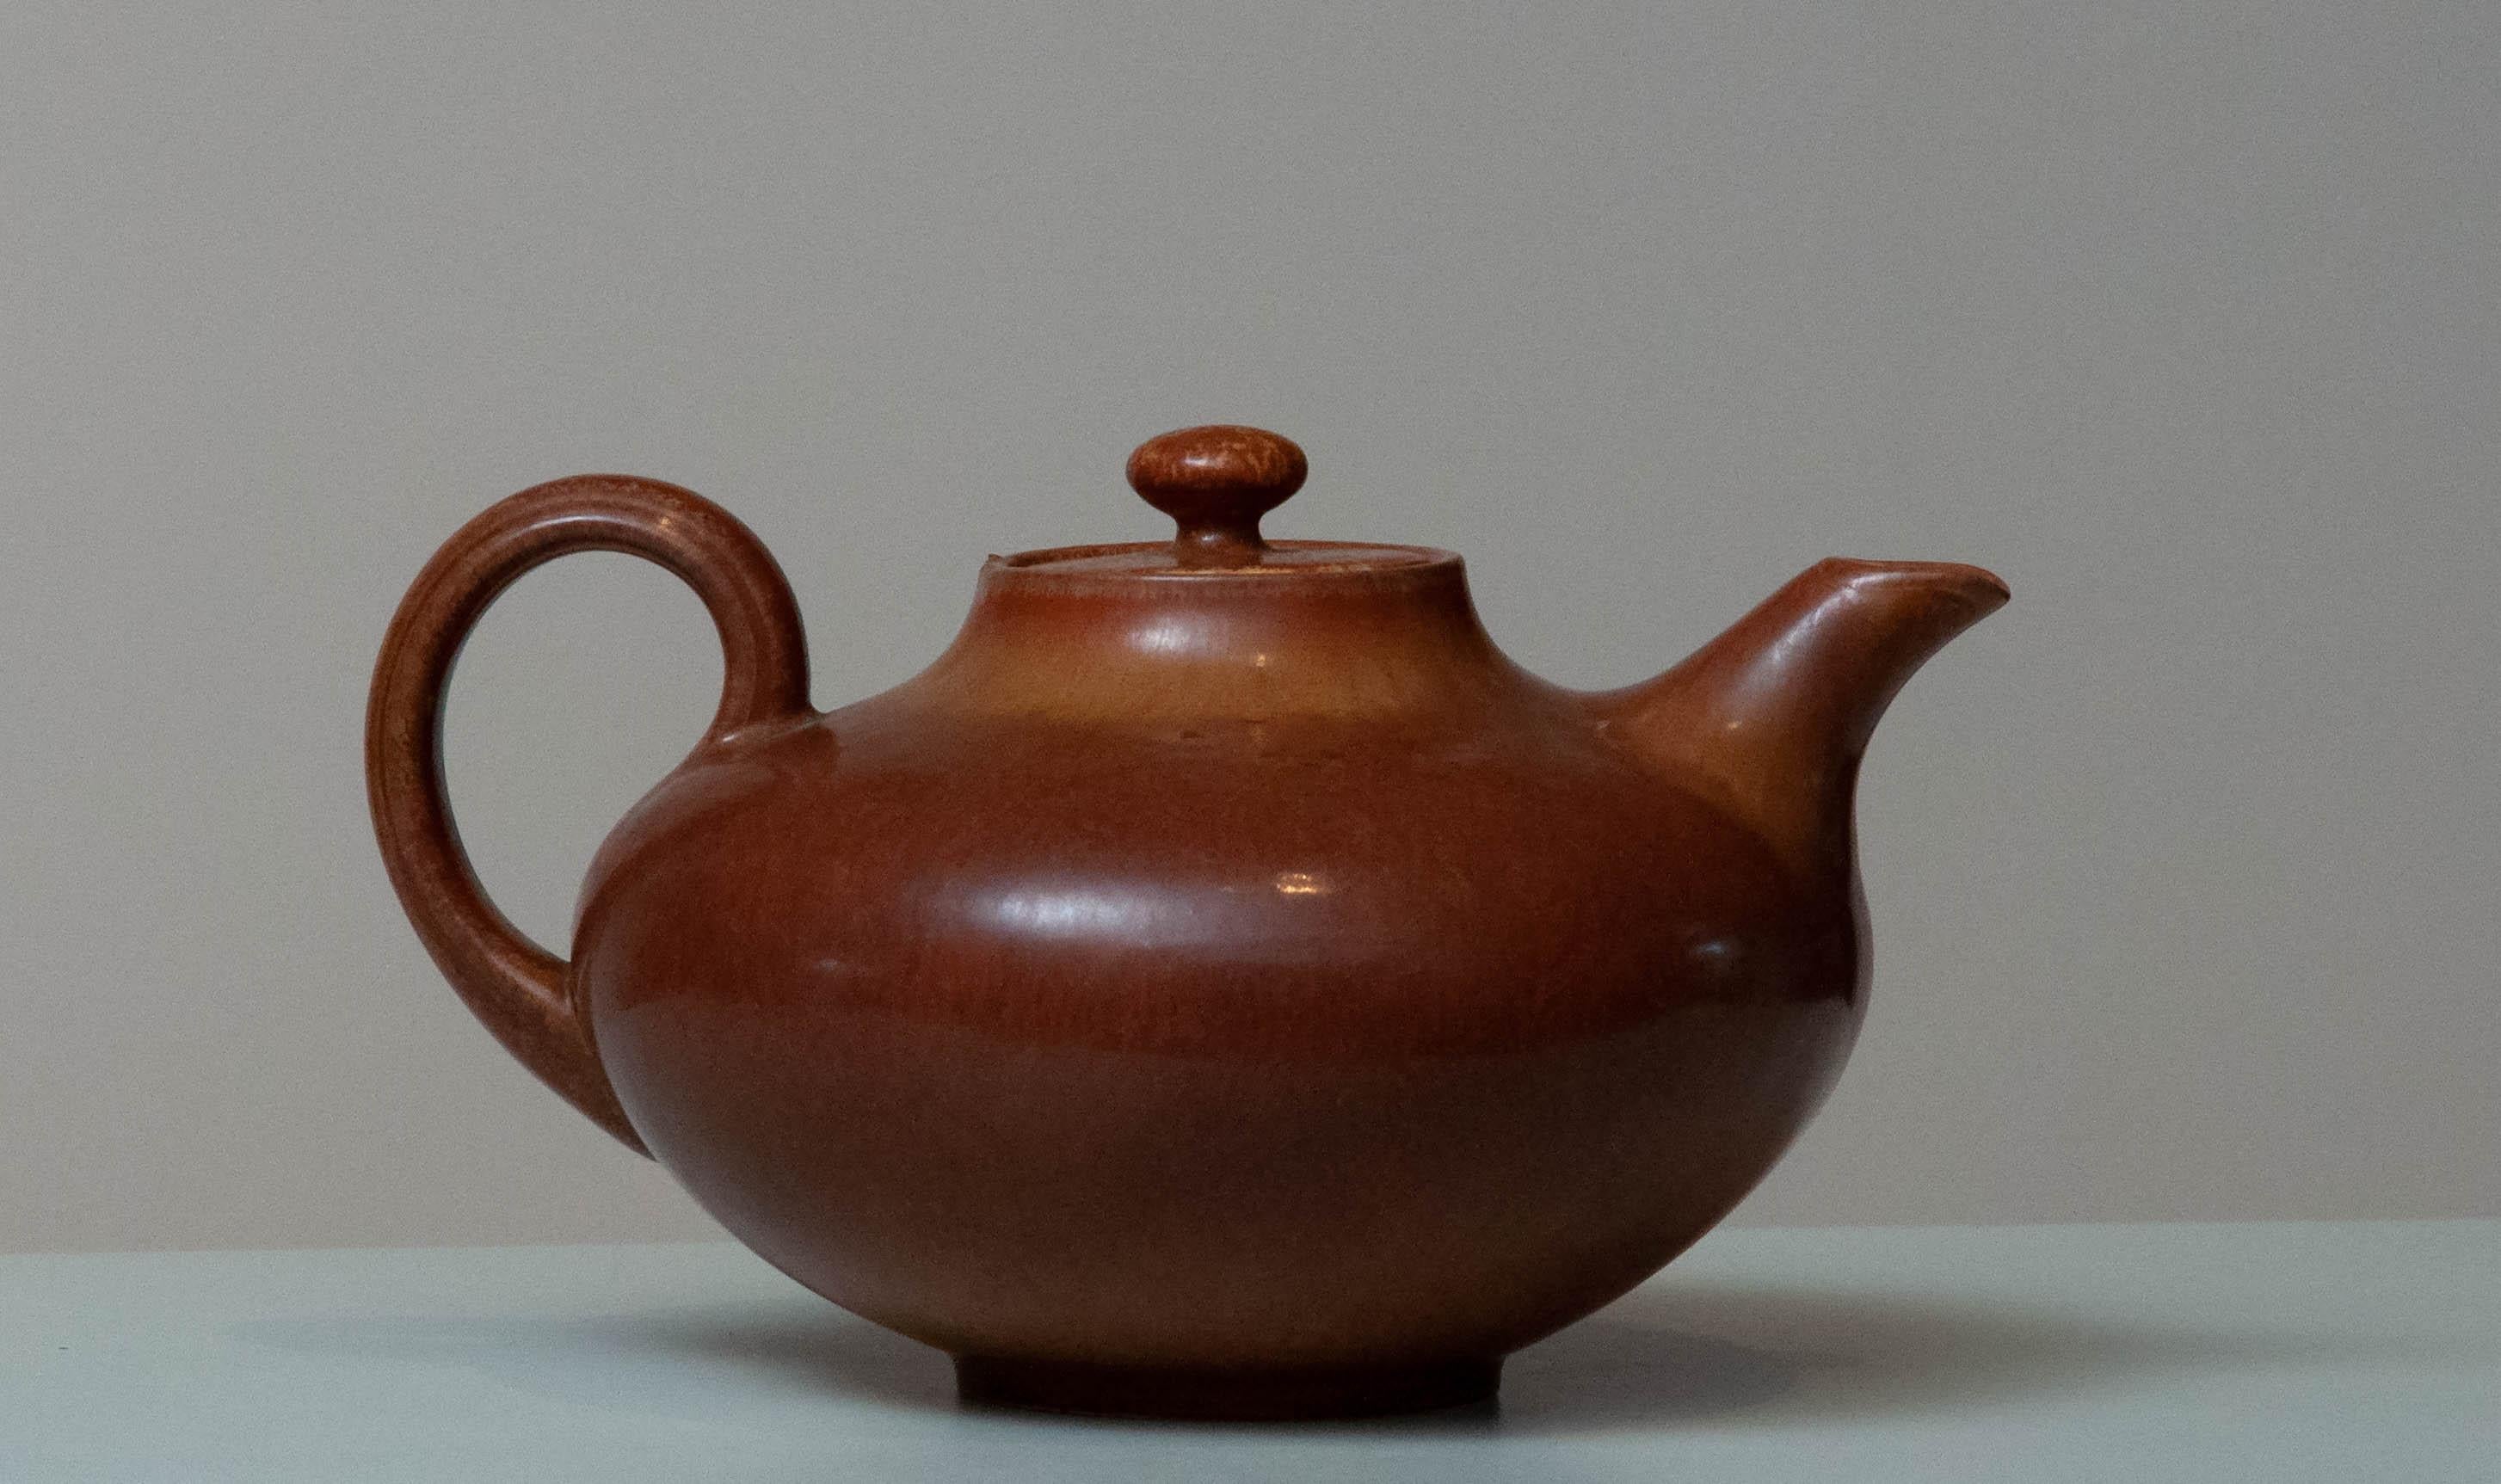 Absolutely 1st. quality Rörstrand teapot designed by Gunnar Nylund in mind condition. This teapot is as clean on the inside as clean on the outside and manufactured in the most beautiful brown color combination and inside the beige glazed ceramic is